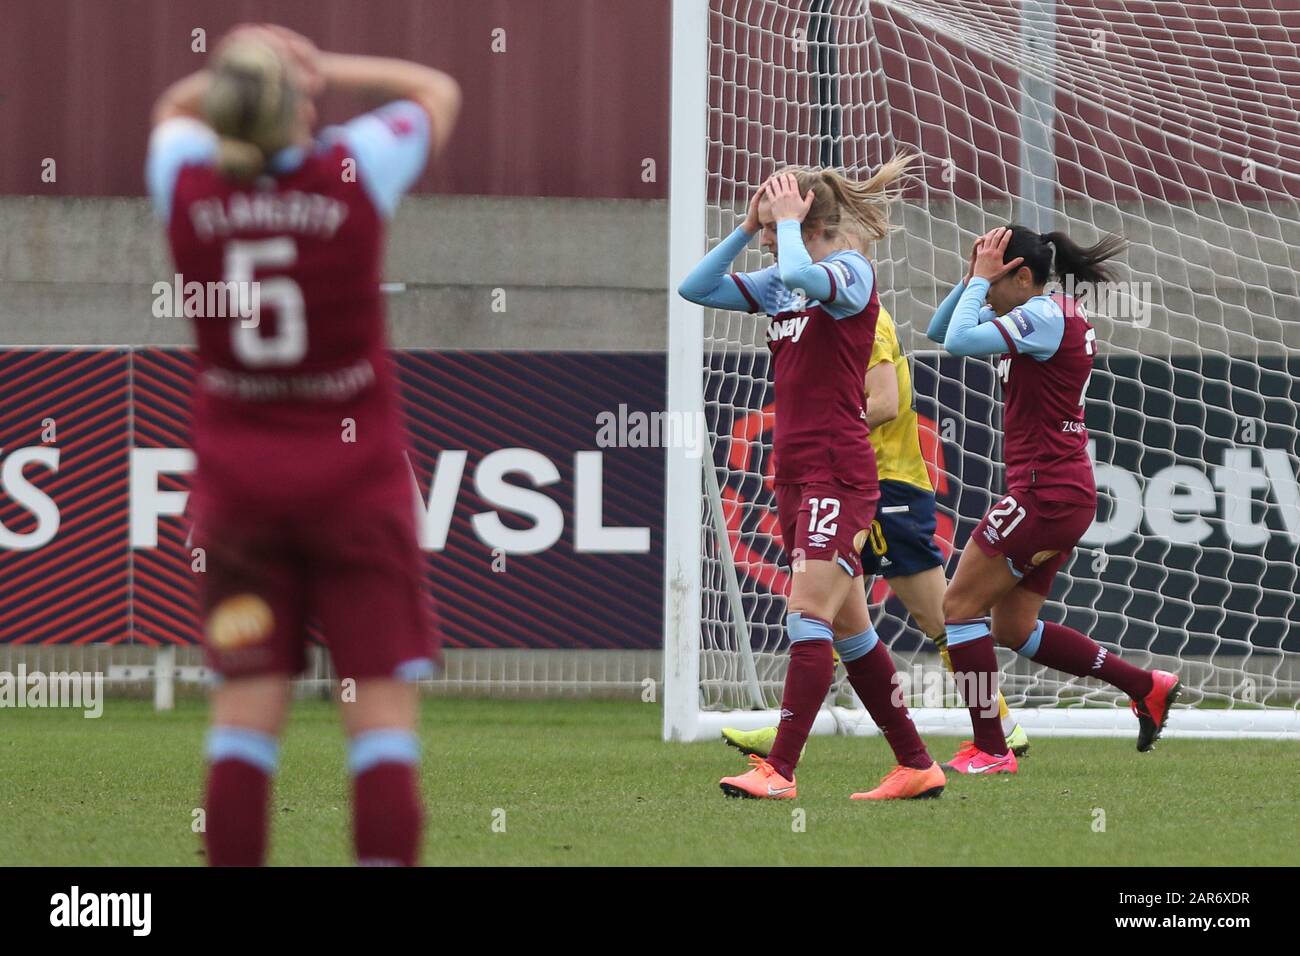 Romford, UK. 26th Jan, 2020.  Gilly Flaherty of West Ham United Women, Kate Longhurst of West Ham United Women and Kenza Dali of West Ham United Women reacting to a missed shot during the Women's FA Cup match between West Ham United and Arsenal at the Rush Green Stadium, Romford, London on Sunday 26th January 2020. (Credit: Jacques Feeney | MI News) Photograph may only be used for newspaper and/or magazine editorial purposes, license required for commercial use Credit: MI News & Sport /Alamy Live News Stock Photo